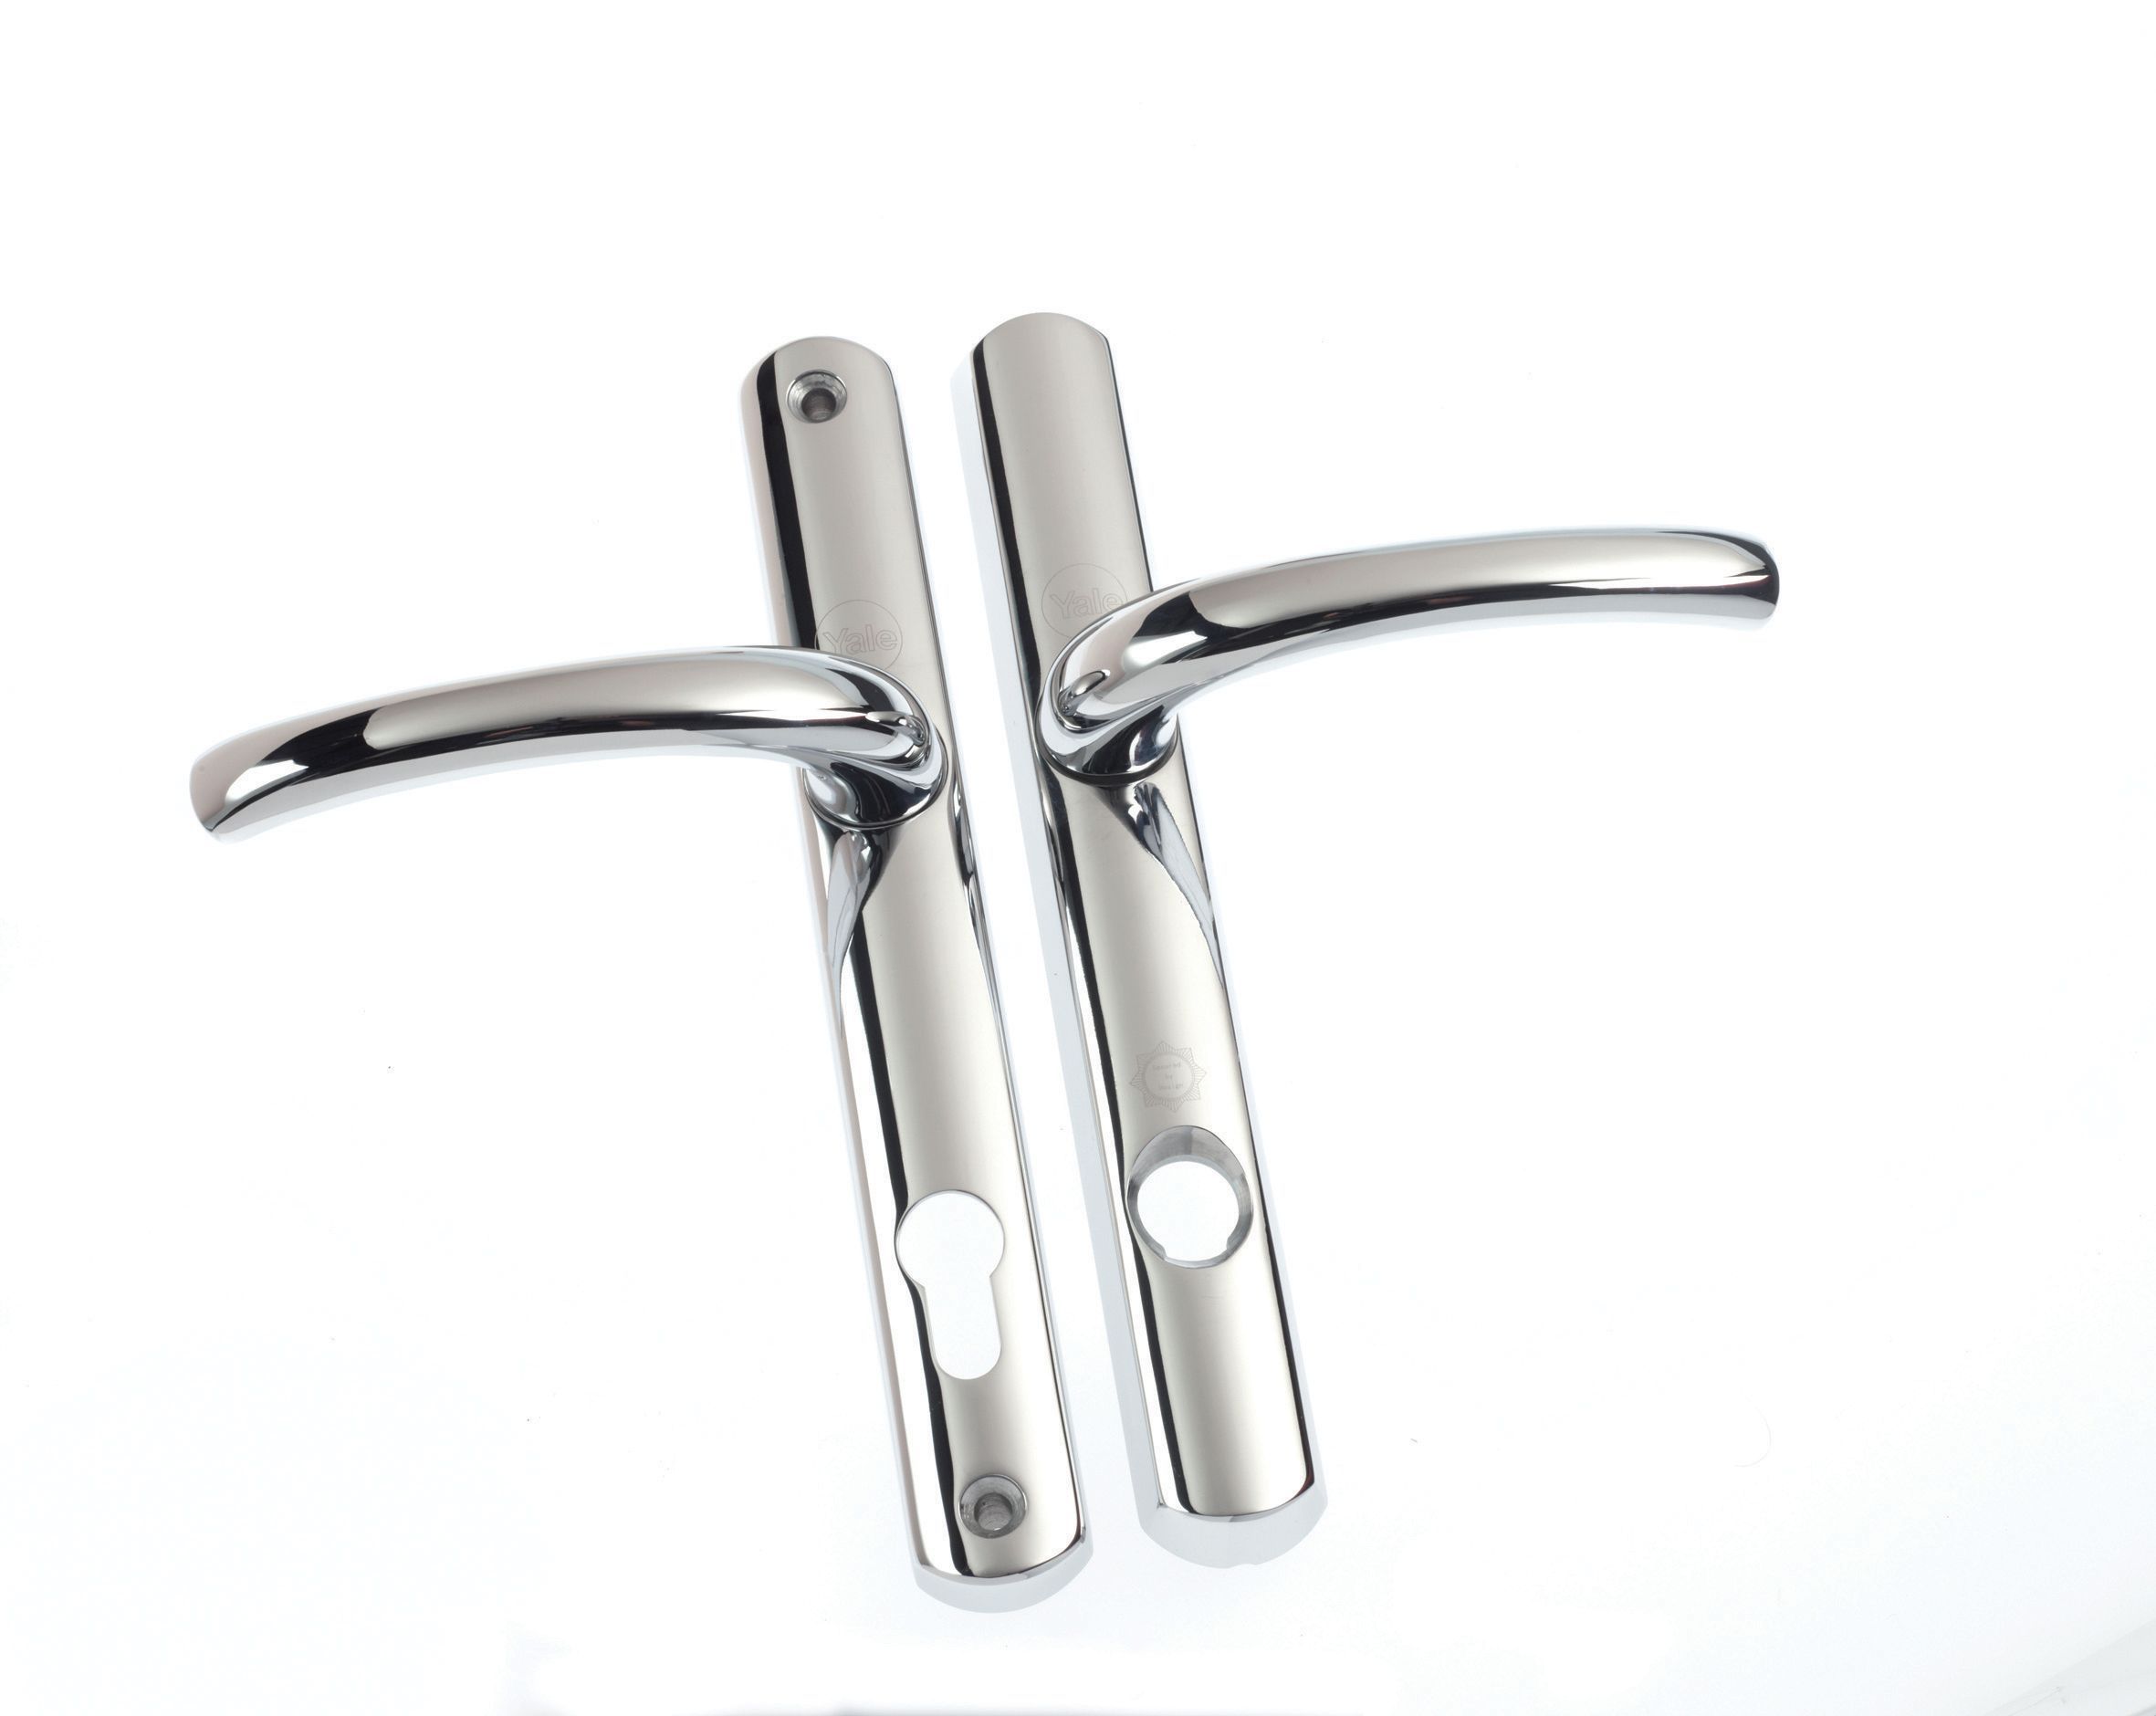 Platinum security Polished Chrome effect Stainless steel Curved Lock Door handle